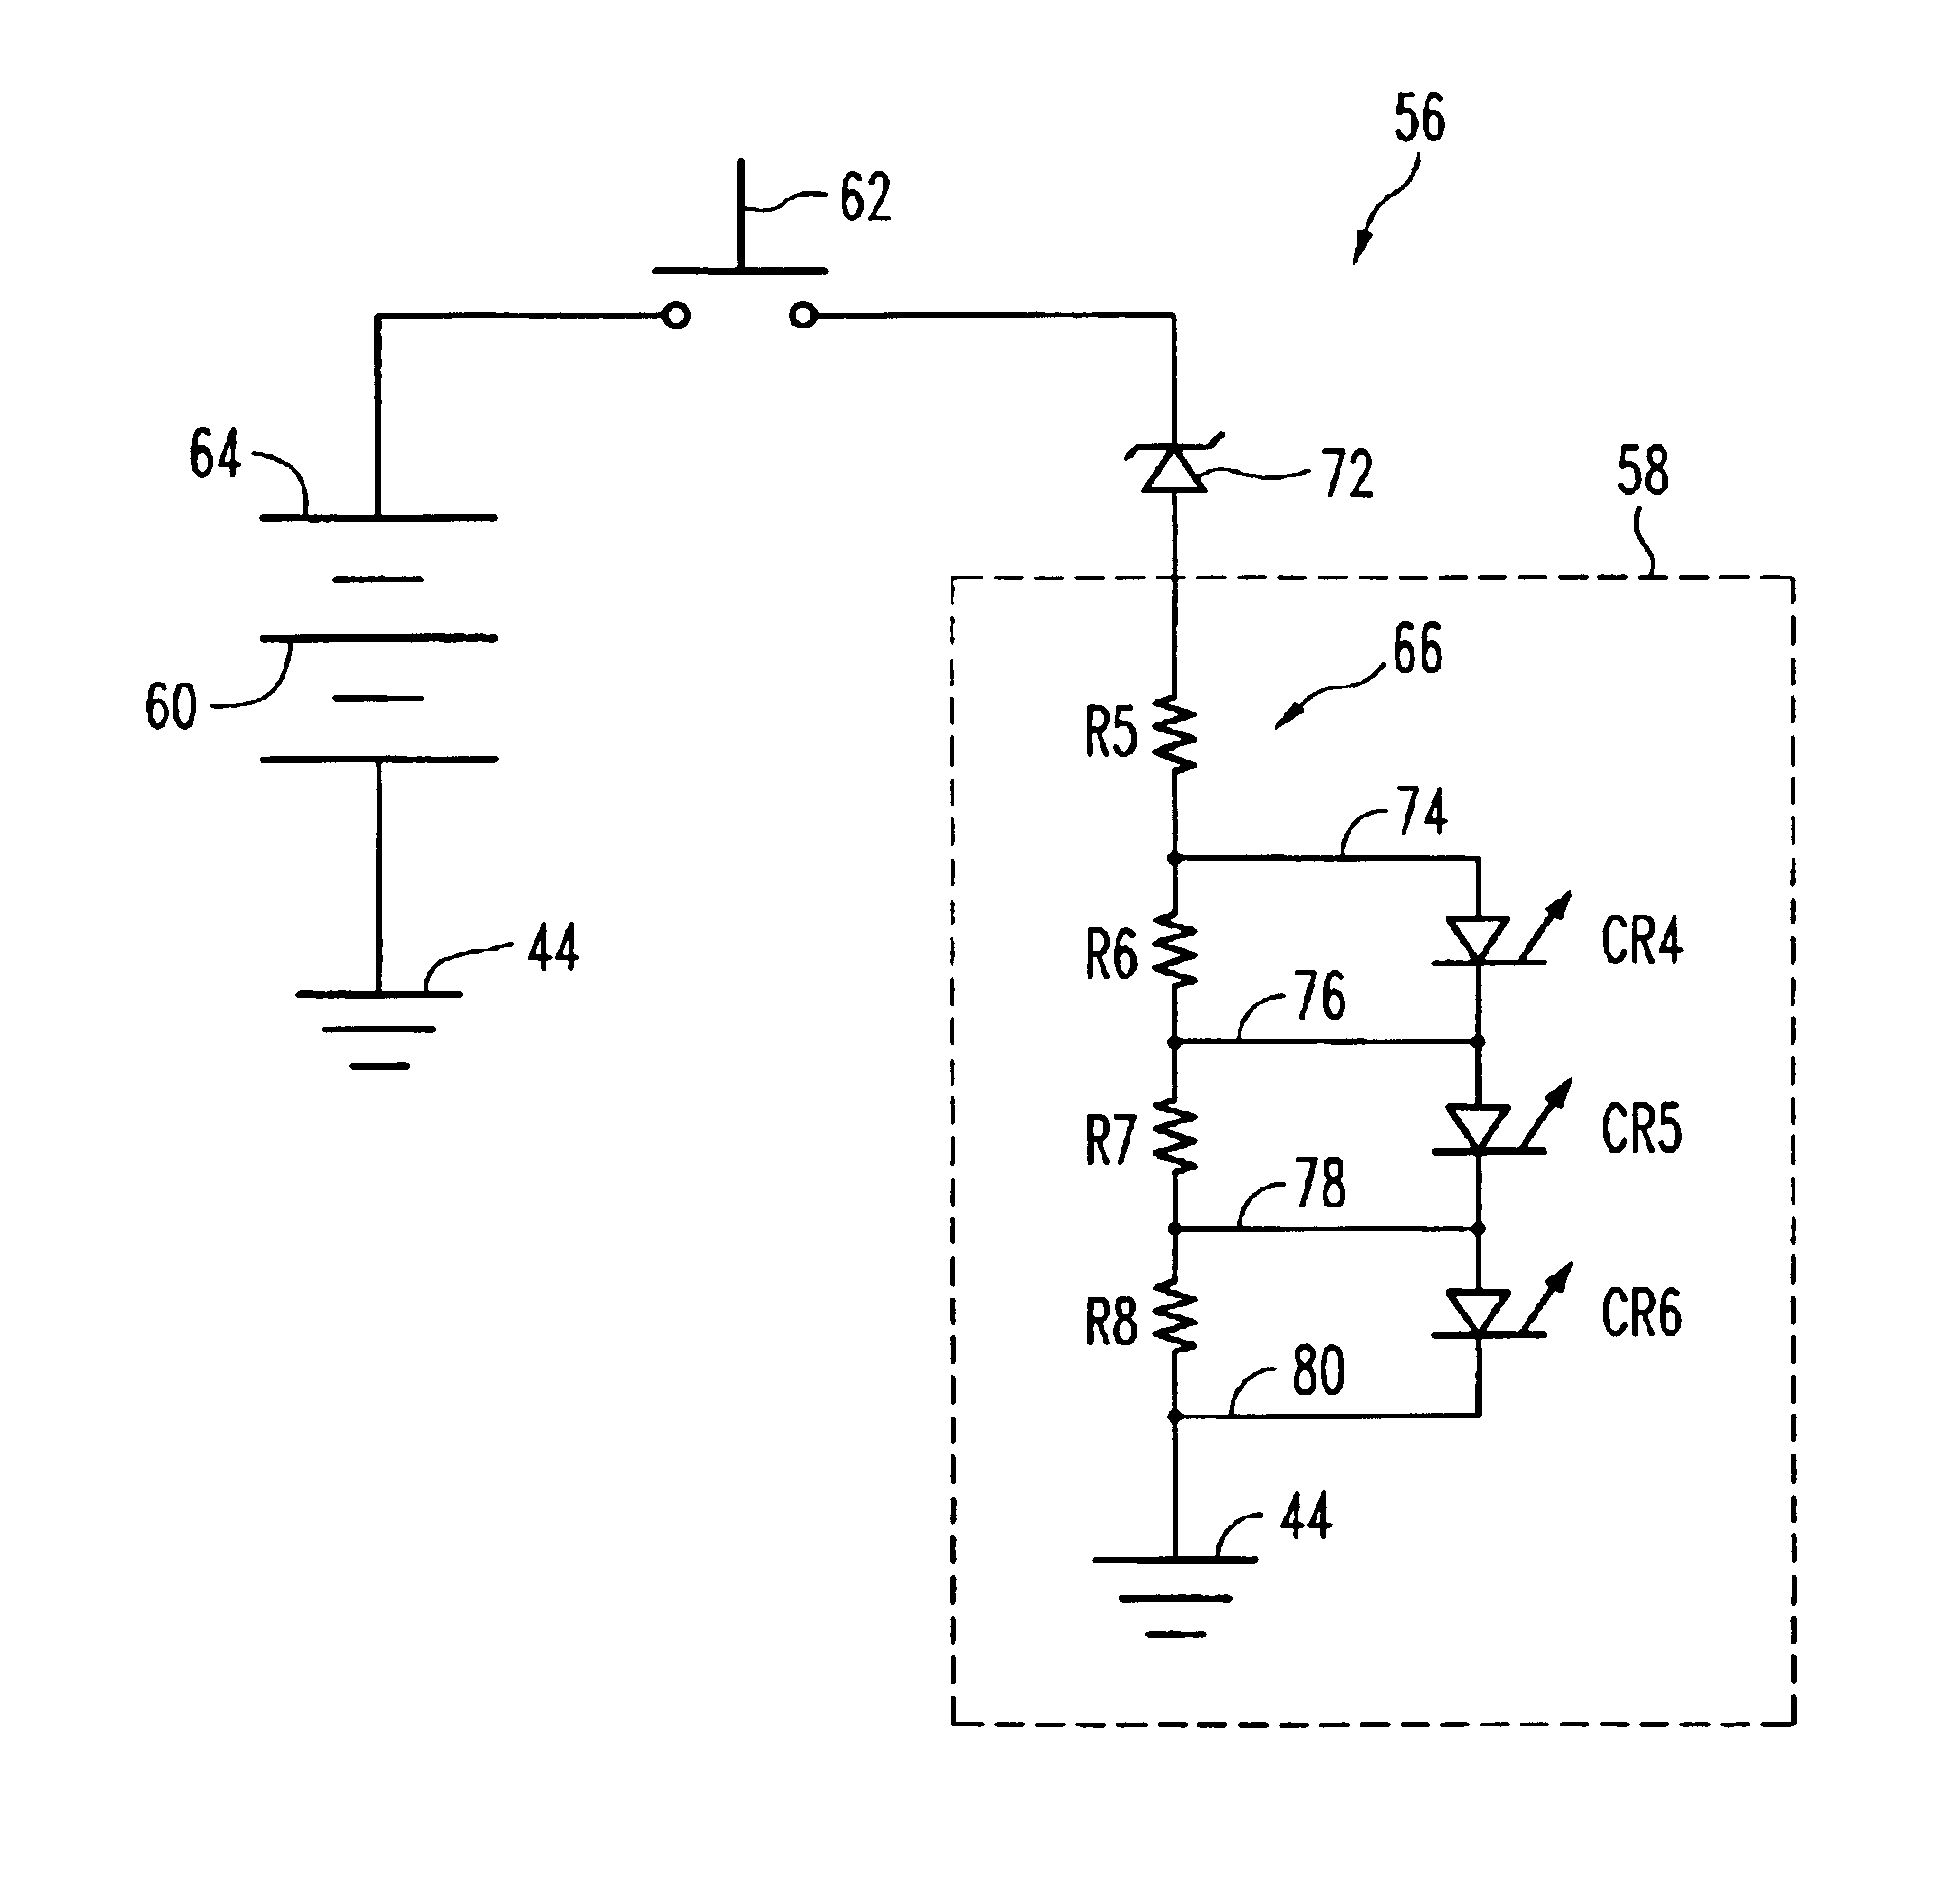 Battery charge indicating circuit